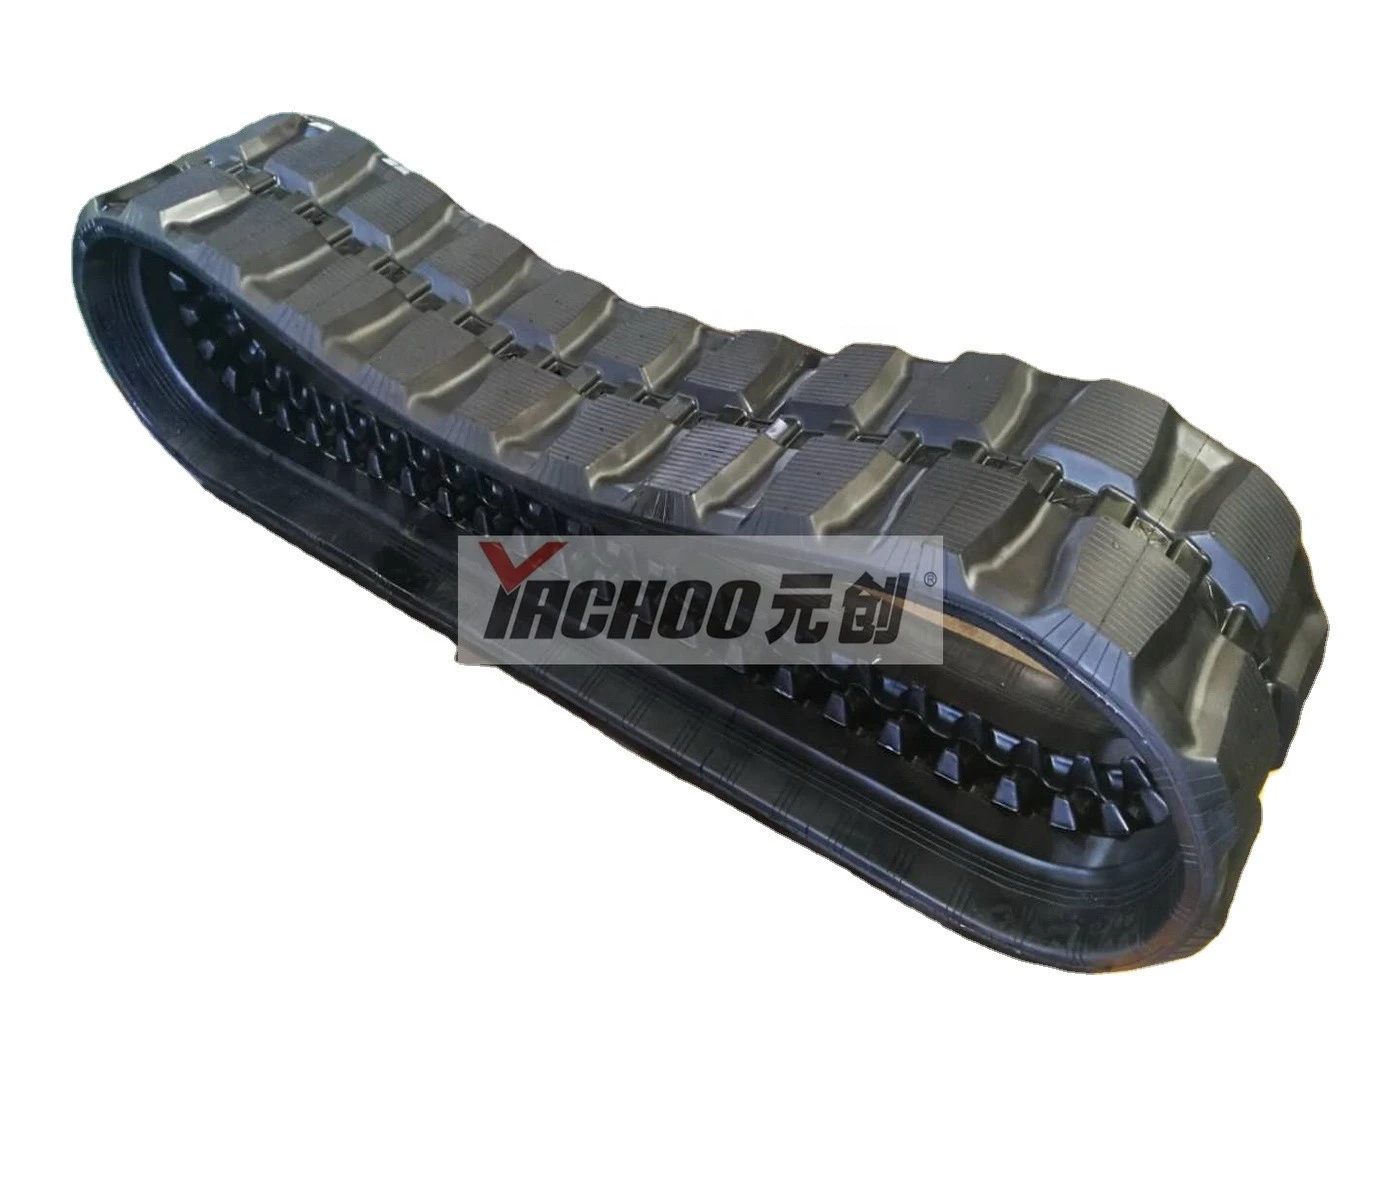 Rubber crawler 400x86x55 Construction machinery parts for excavator loader dumper Yachoo